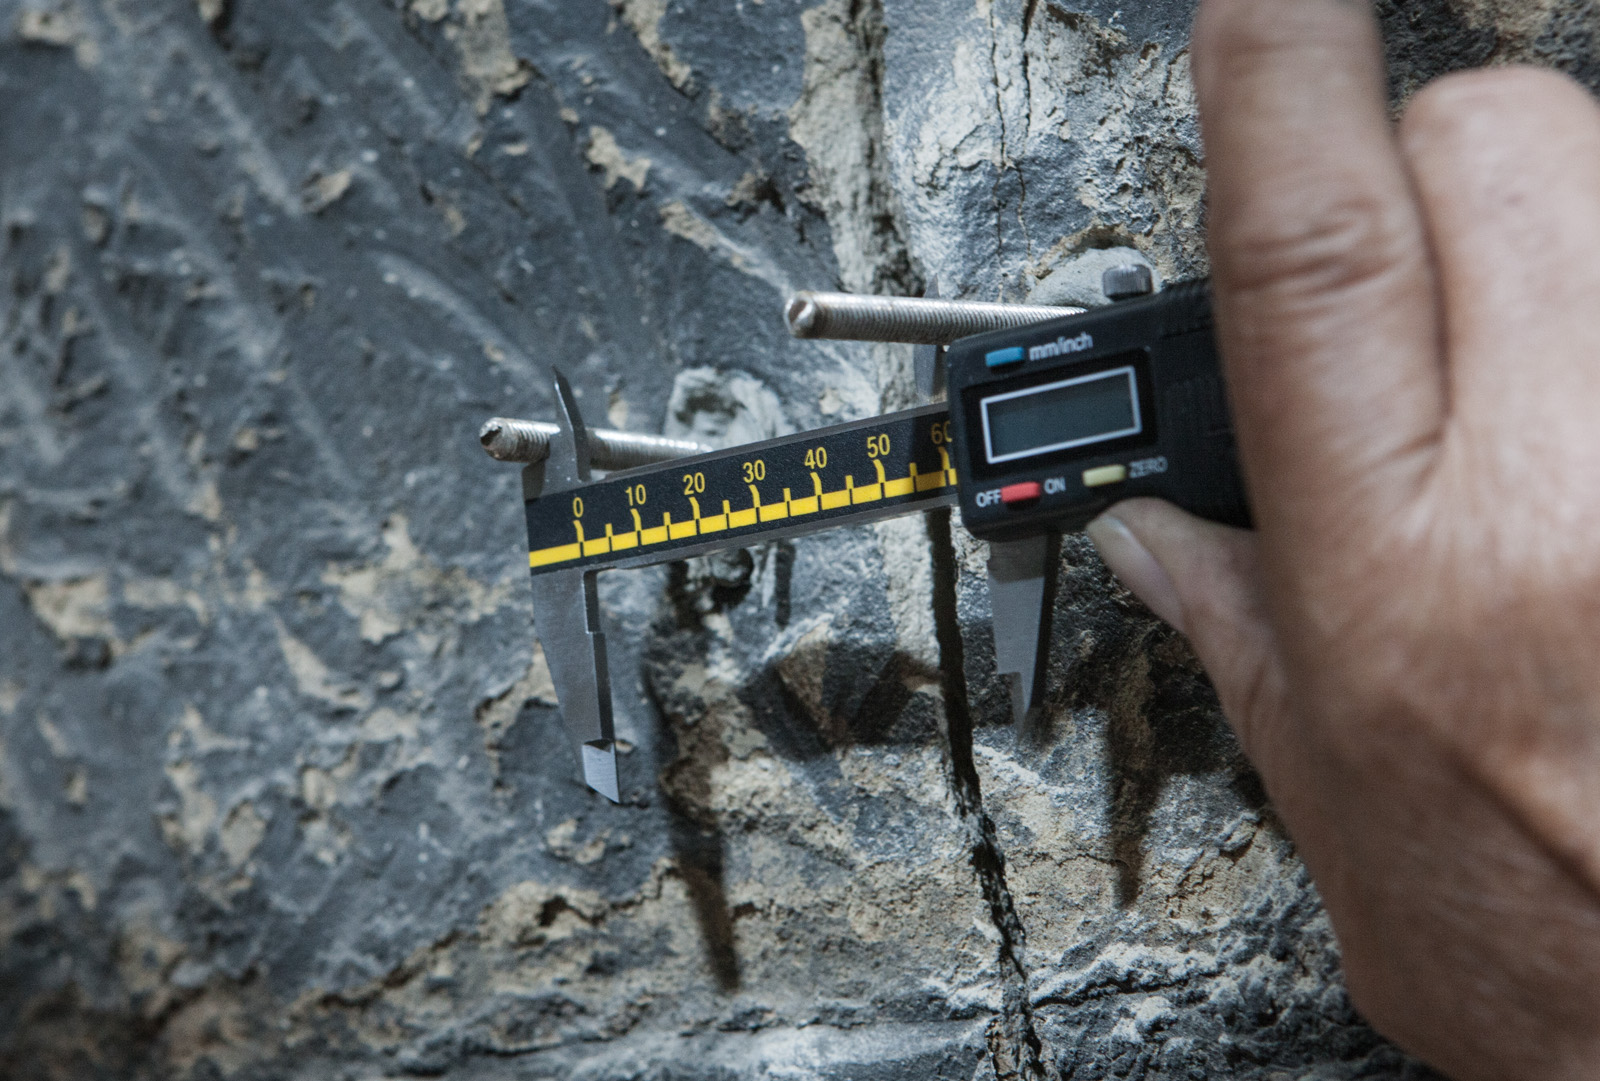 measuring crack extension with a micrometer